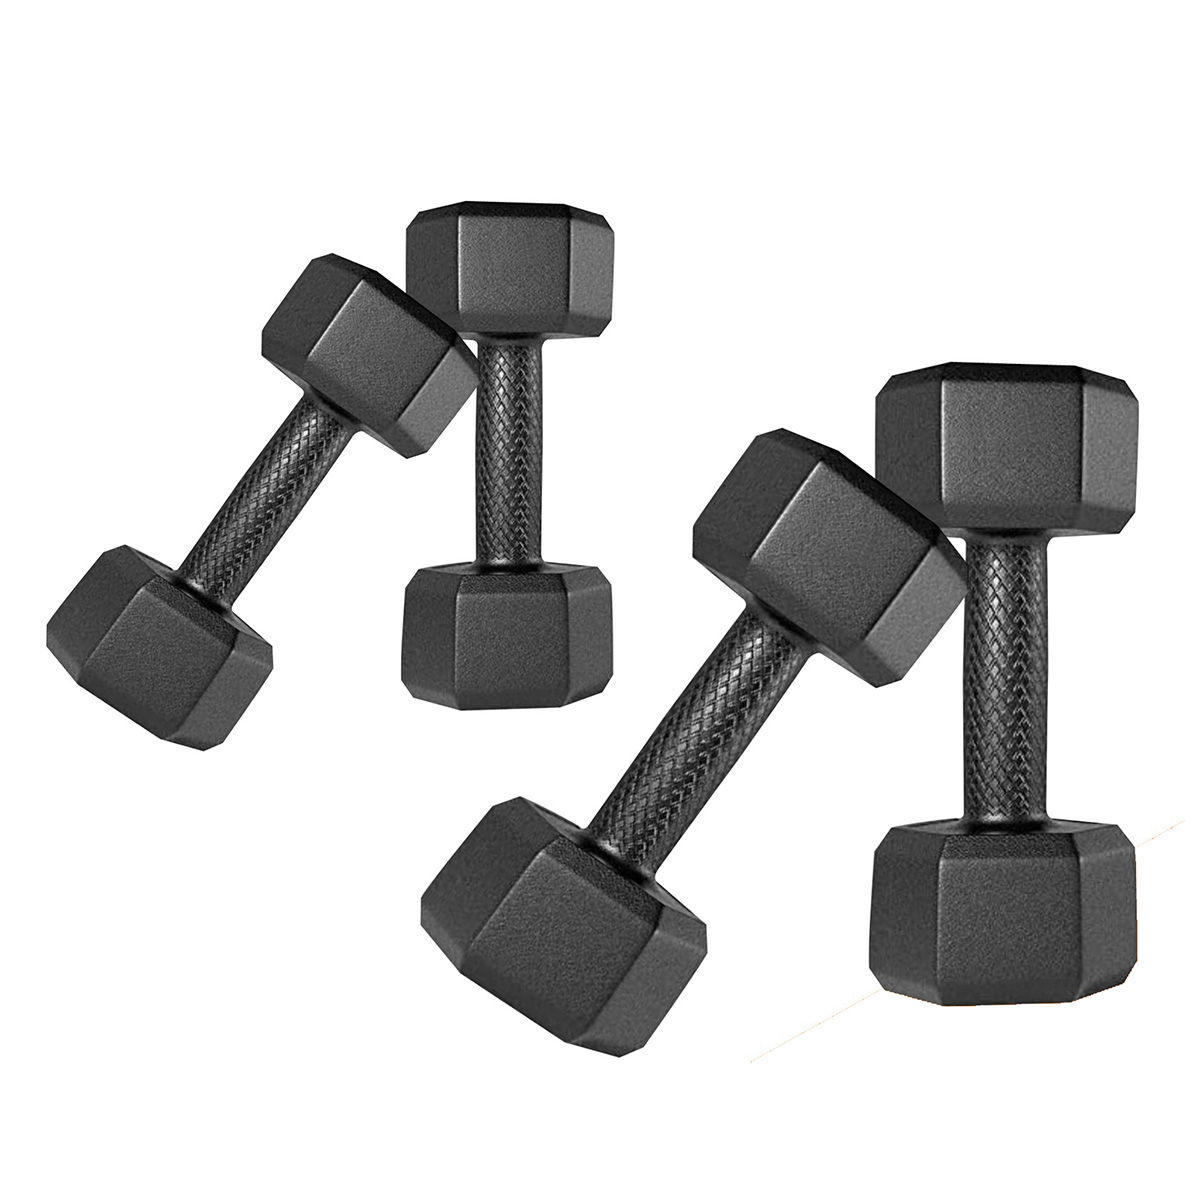 Fitzon PVC Hexa DM-4KG and 5KG Combo 161 Dumbbells and Fitness Kit Whole Body Workout (Set of 2)